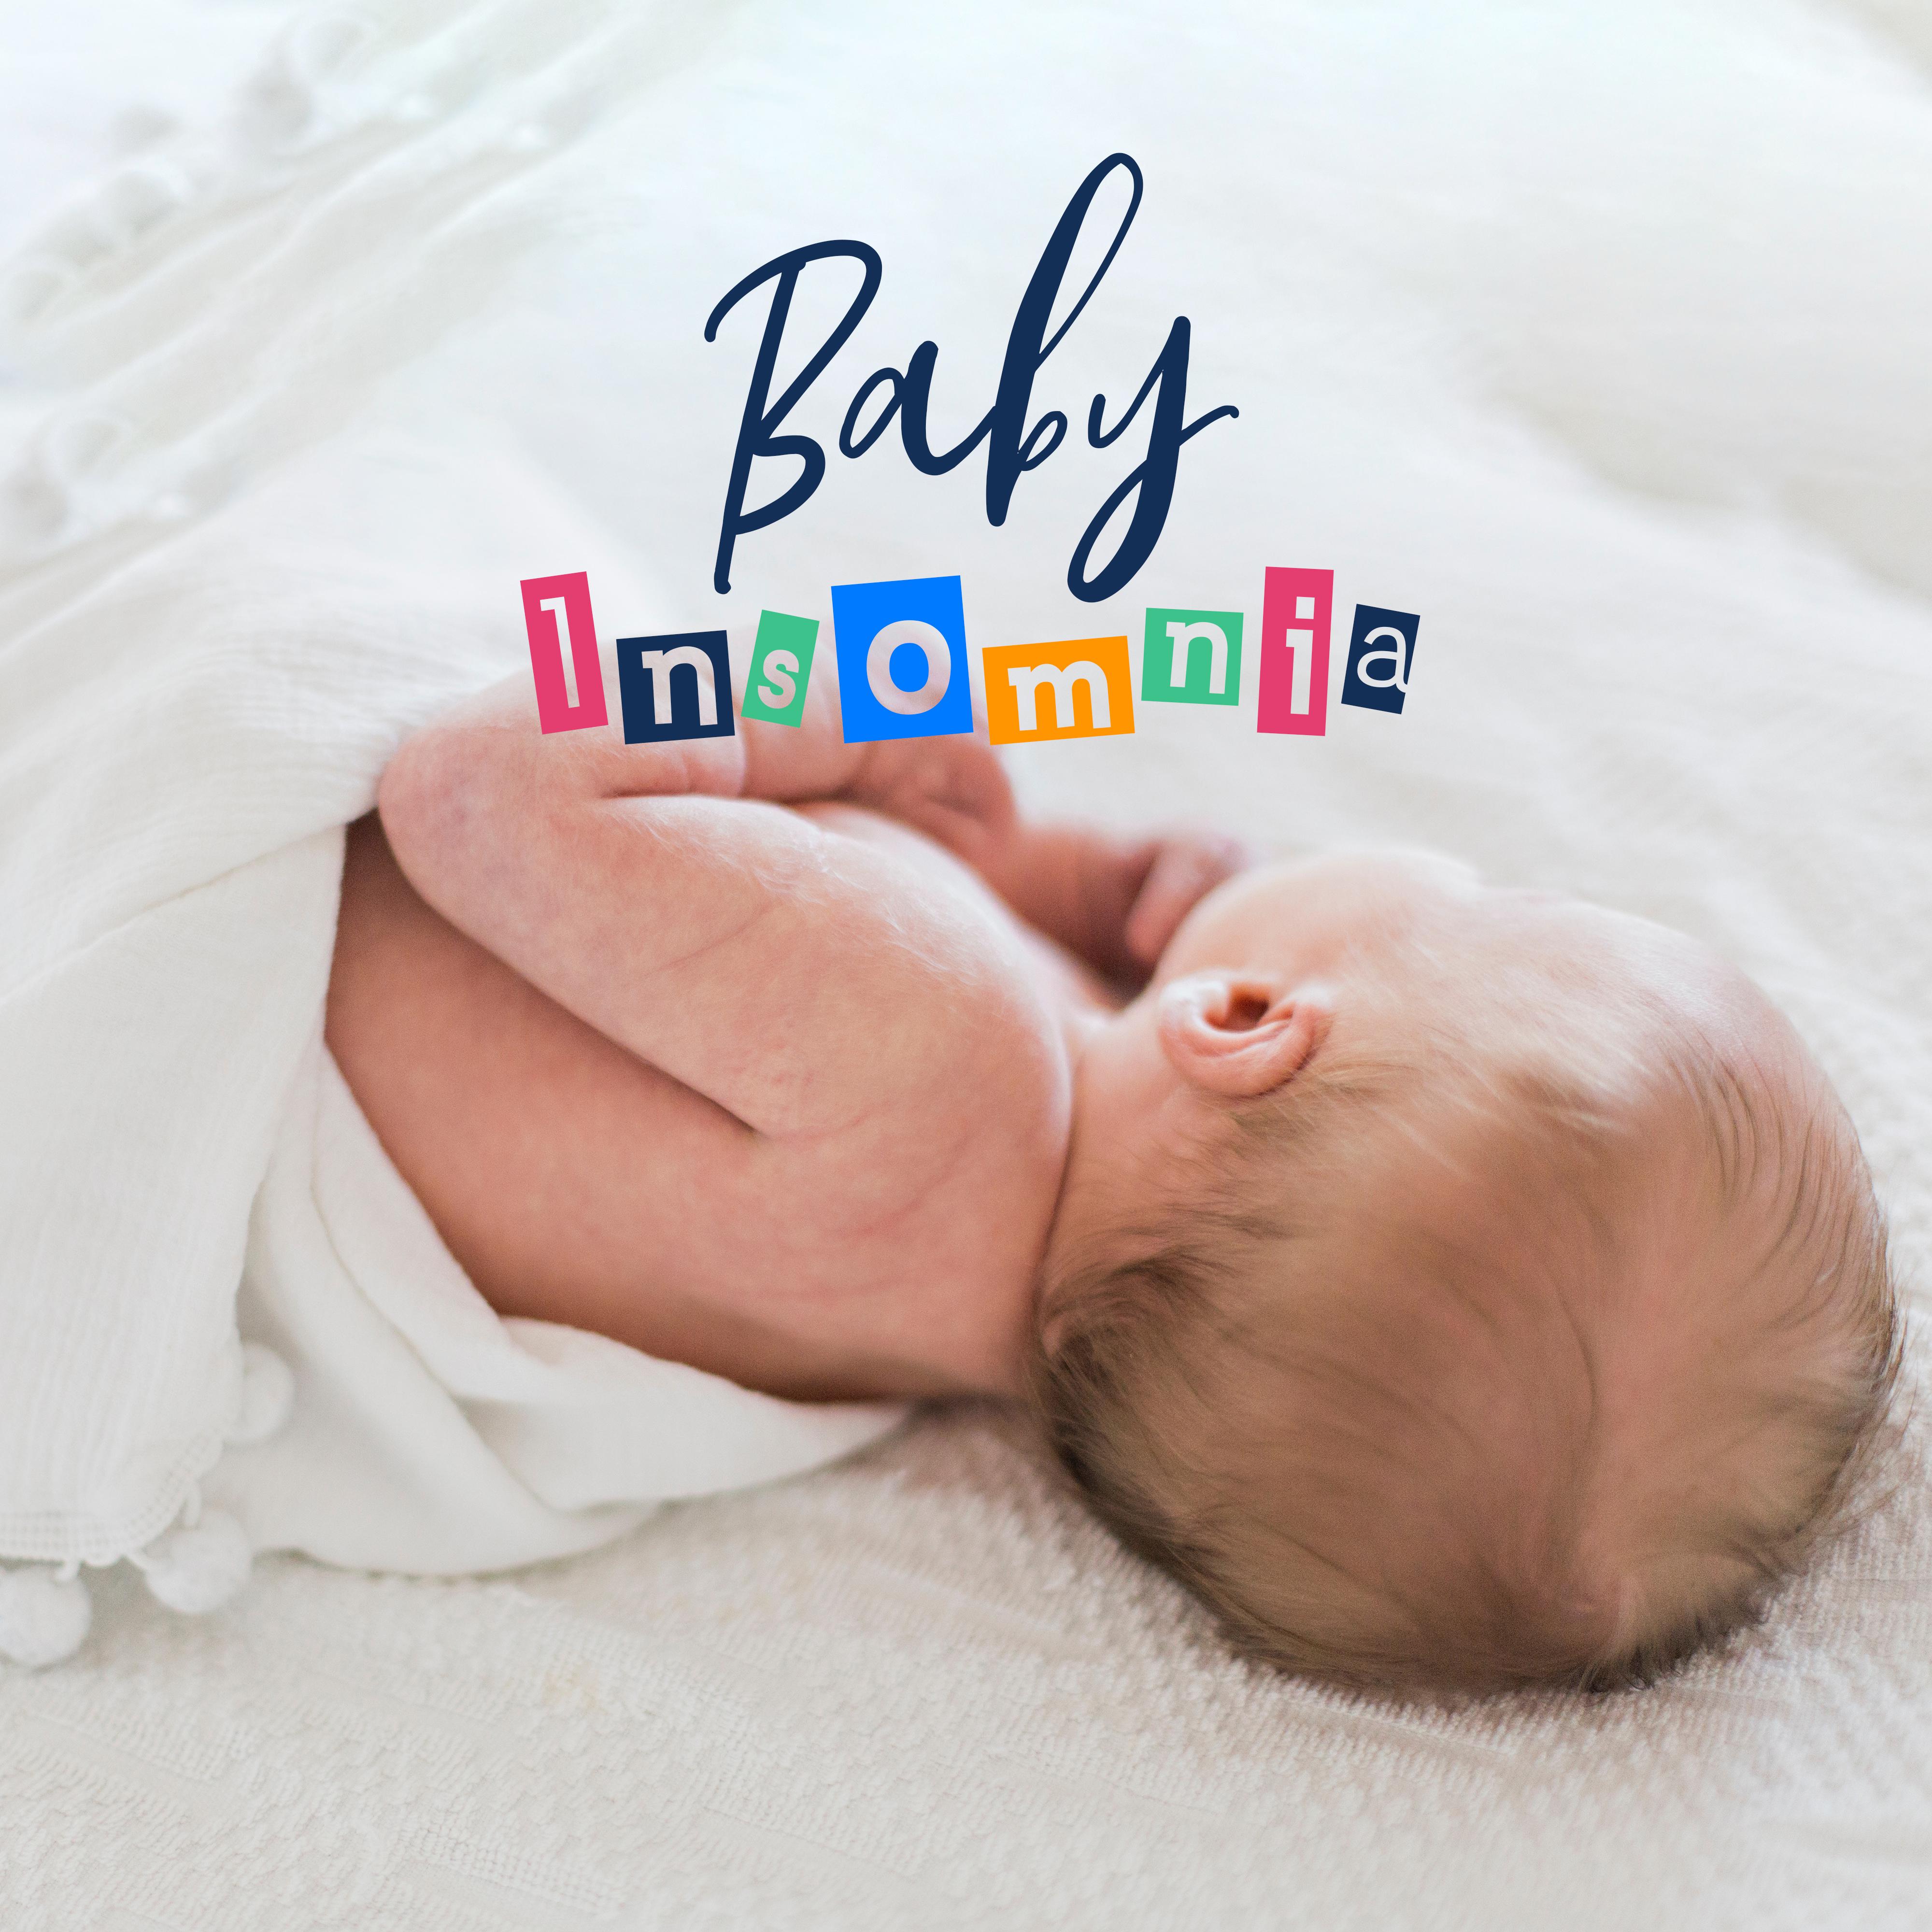 Baby Insomnia  Musical Set Facilitating Falling Asleep for a Baby, Deeply Relaxing and Drowsy Melodies that' ll Help to Put the Baby to Sleep